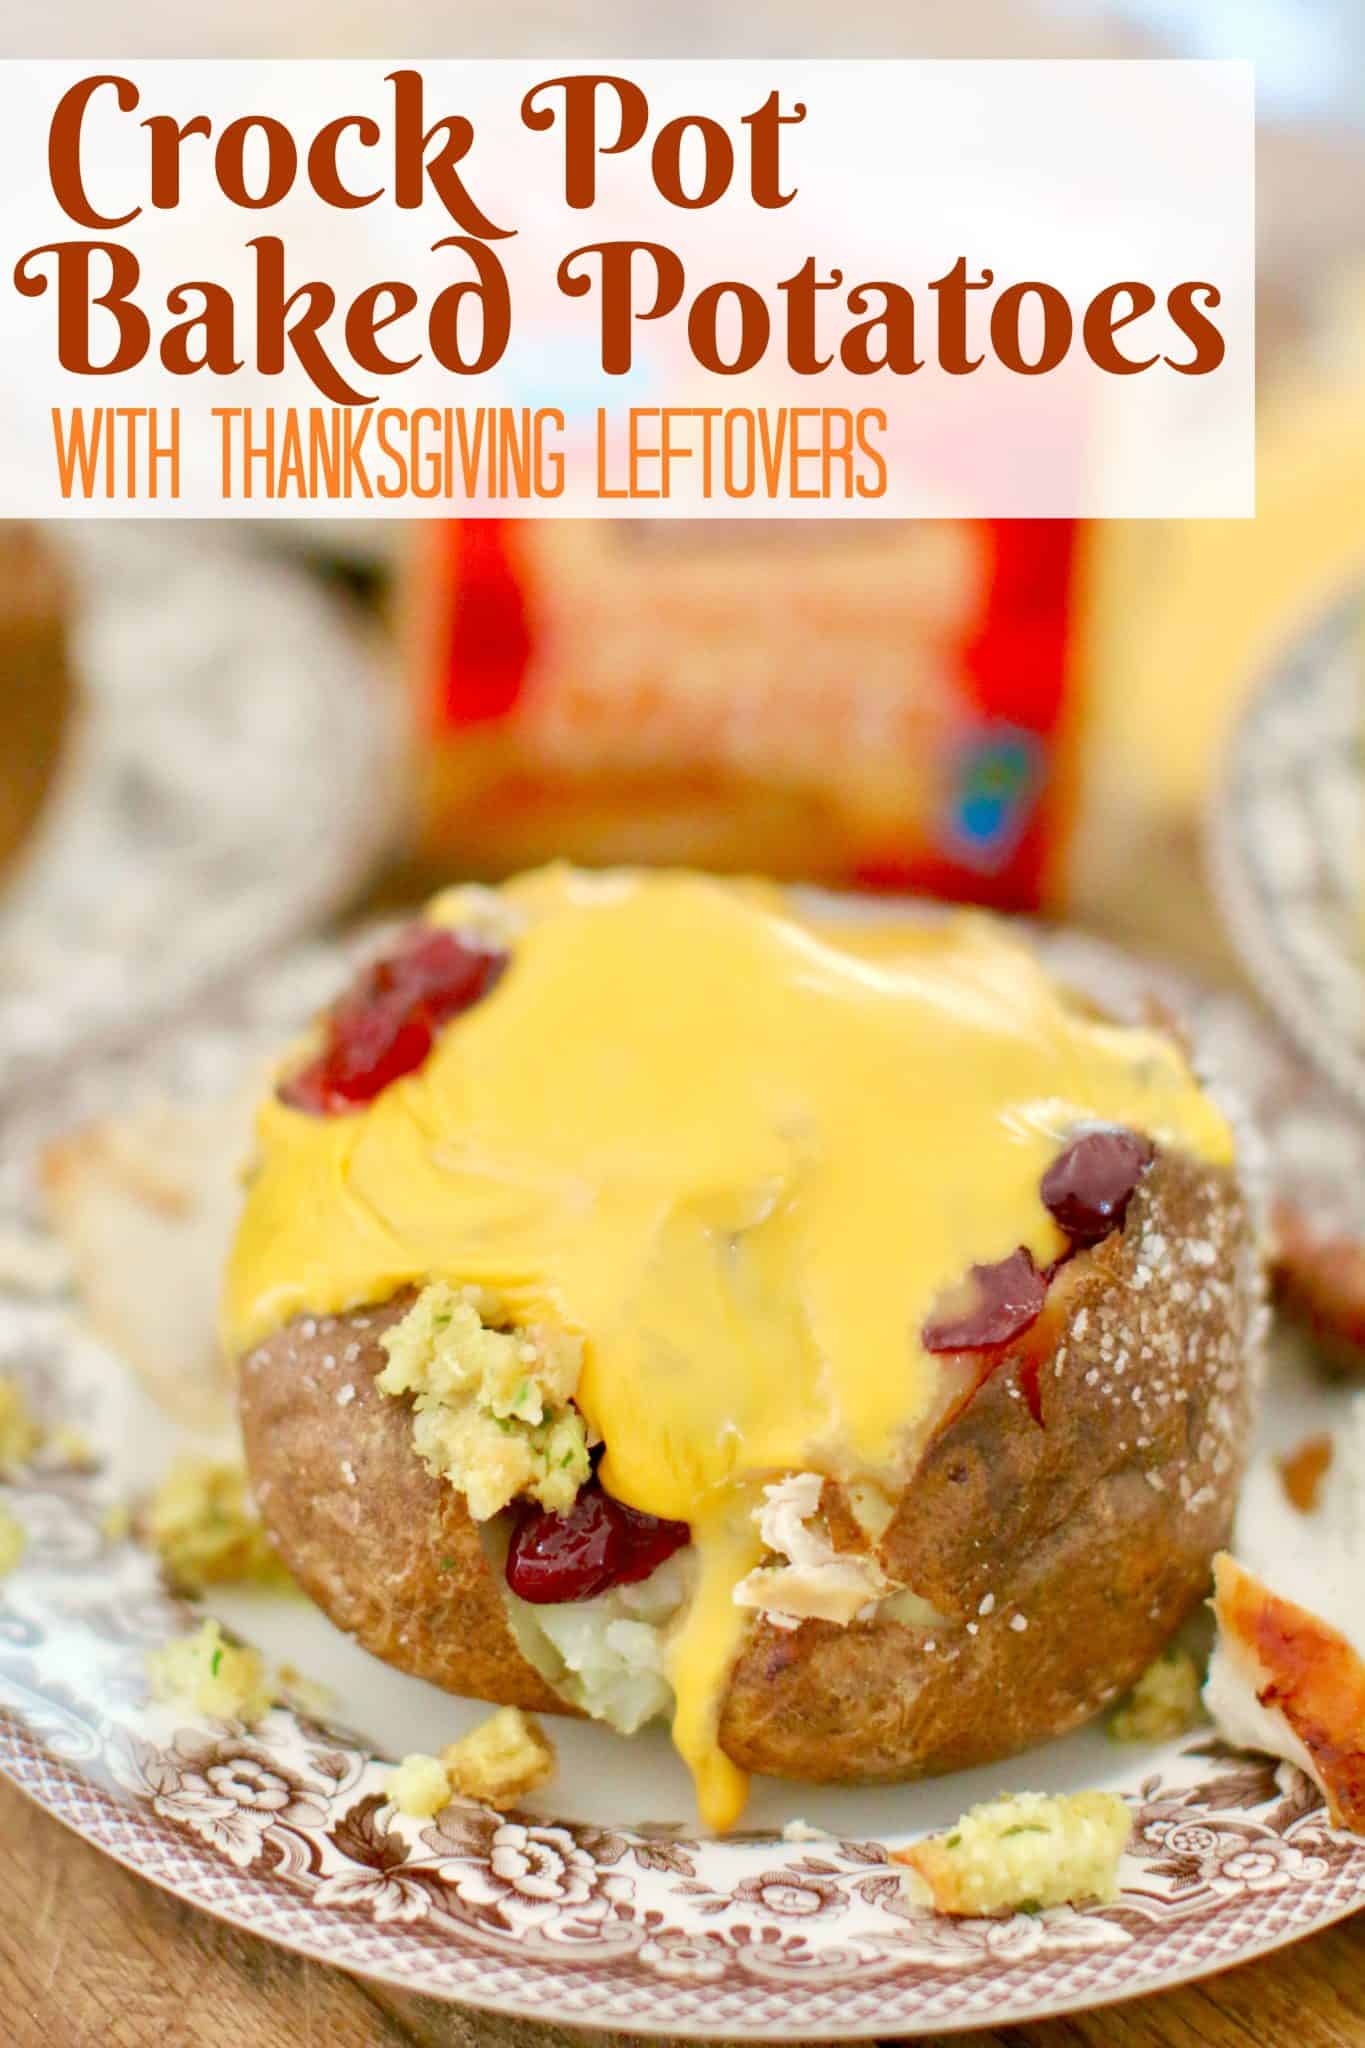 CROCK POT BAKED POTATOES with Thanksgiving Leftovers recipe from The Country Cook. Fully cooked baked potato stuffed with Thanksgiving leftover food on a round plate.